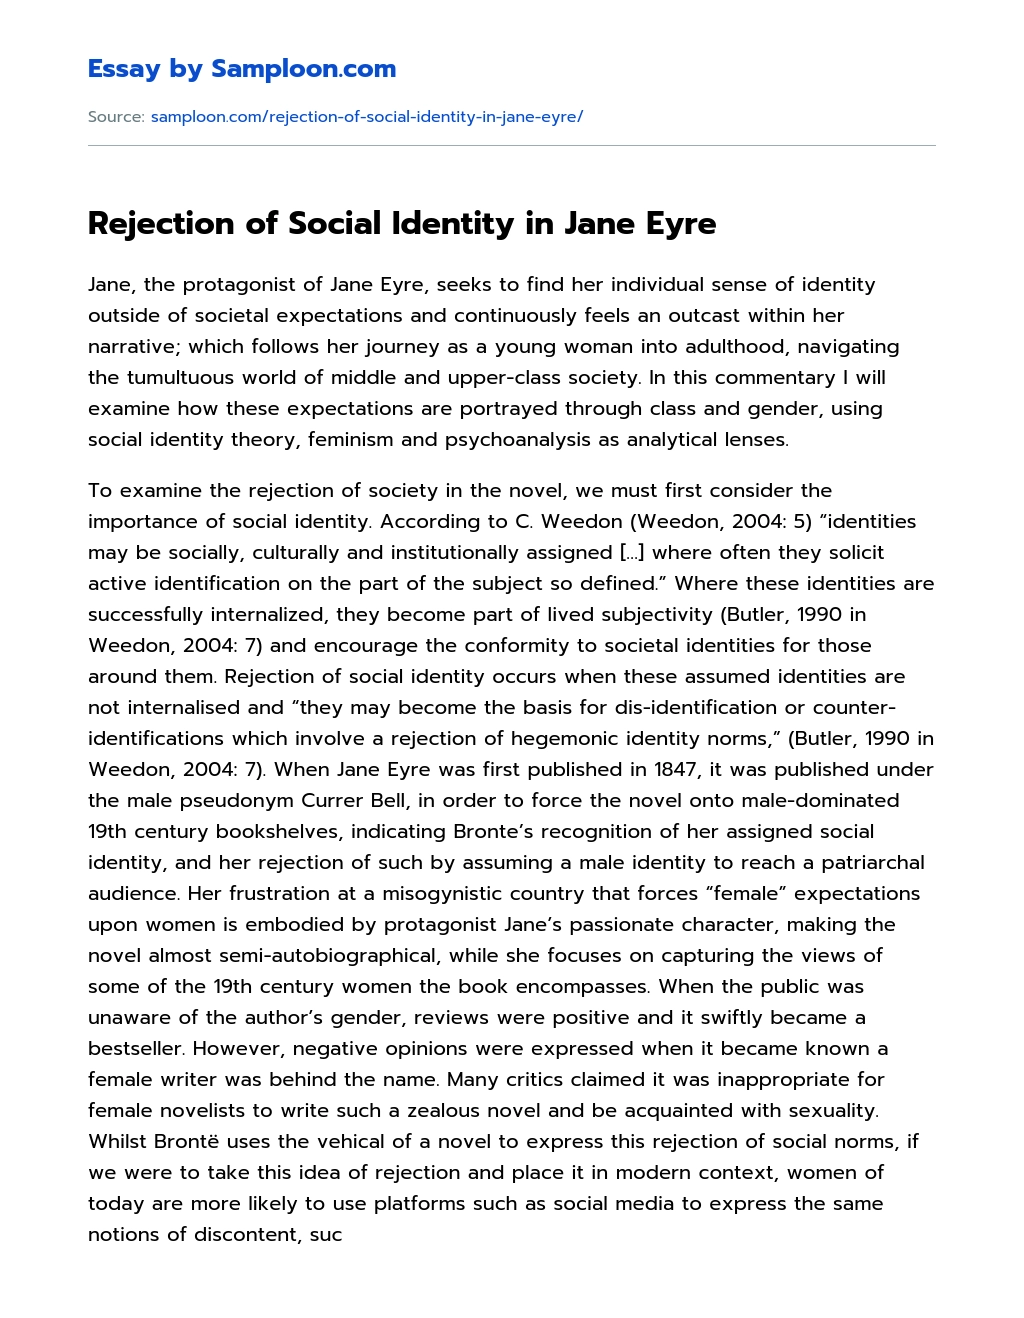 Rejection of Social Identity in Jane Eyre Analytical Essay essay